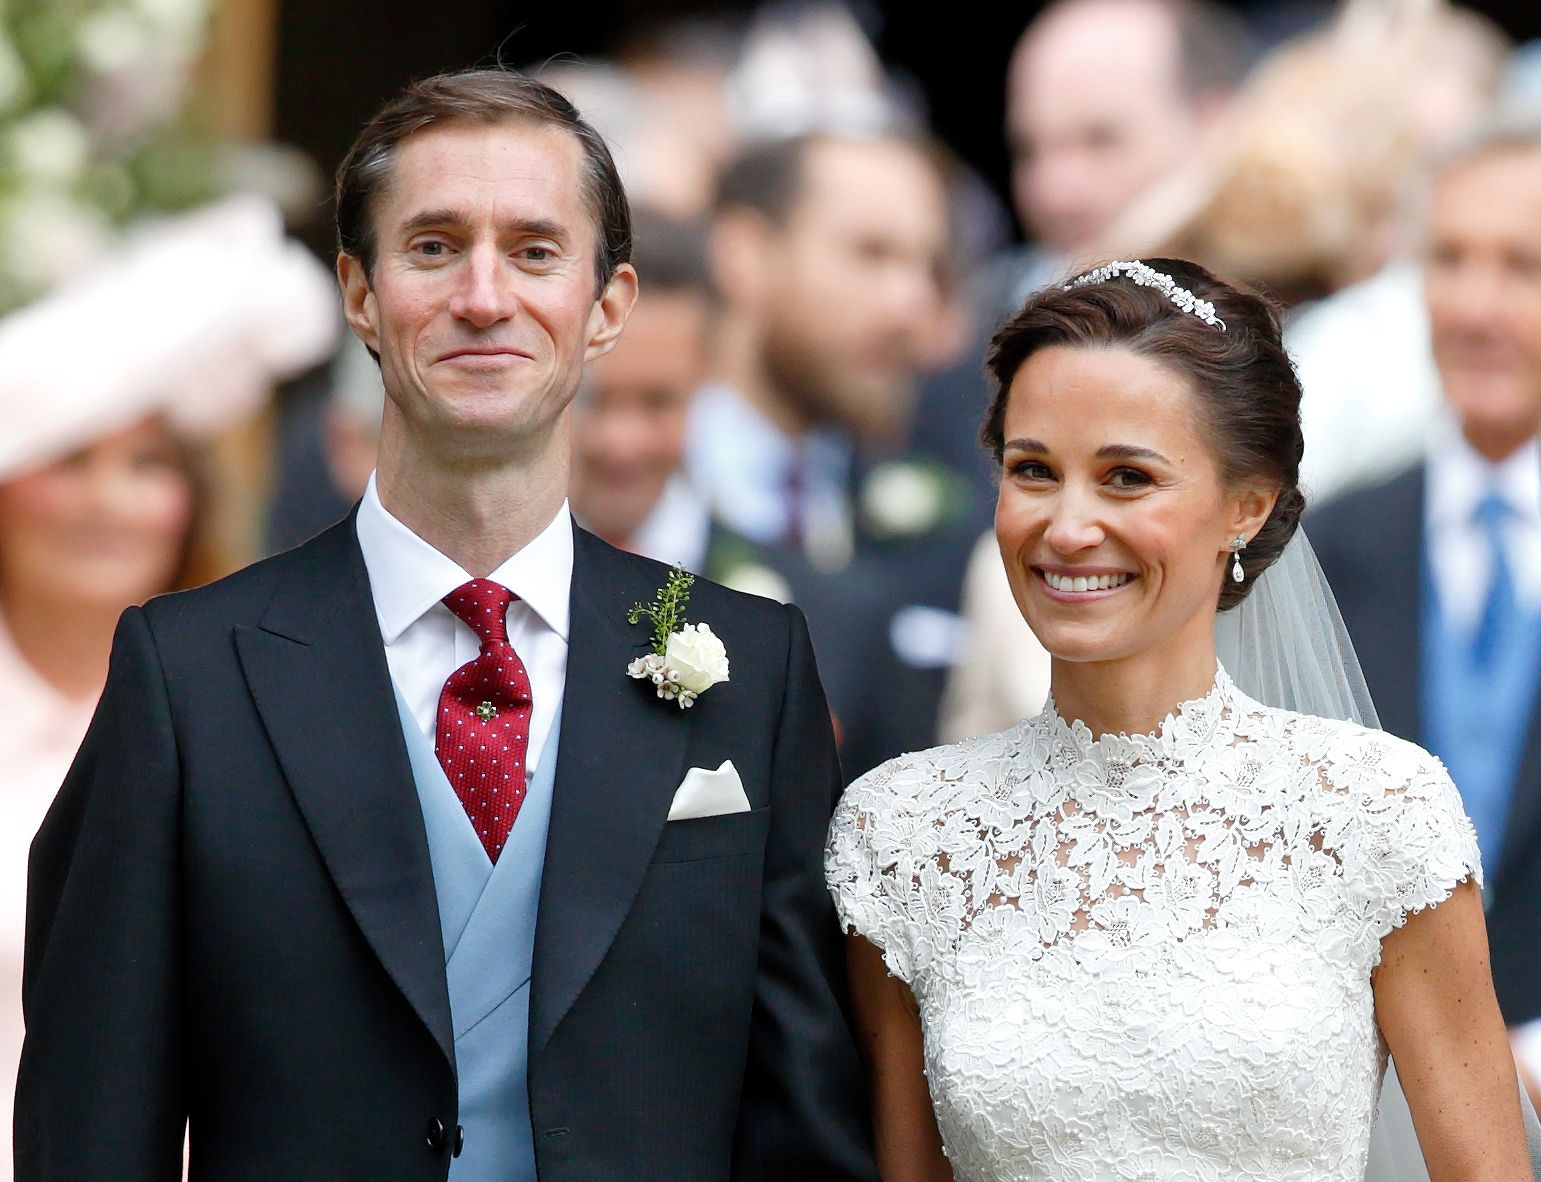 James Matthews and Pippa Middleton as they left St Mark's Church after their wedding on May 20, 2017 | Photo: Getty Images